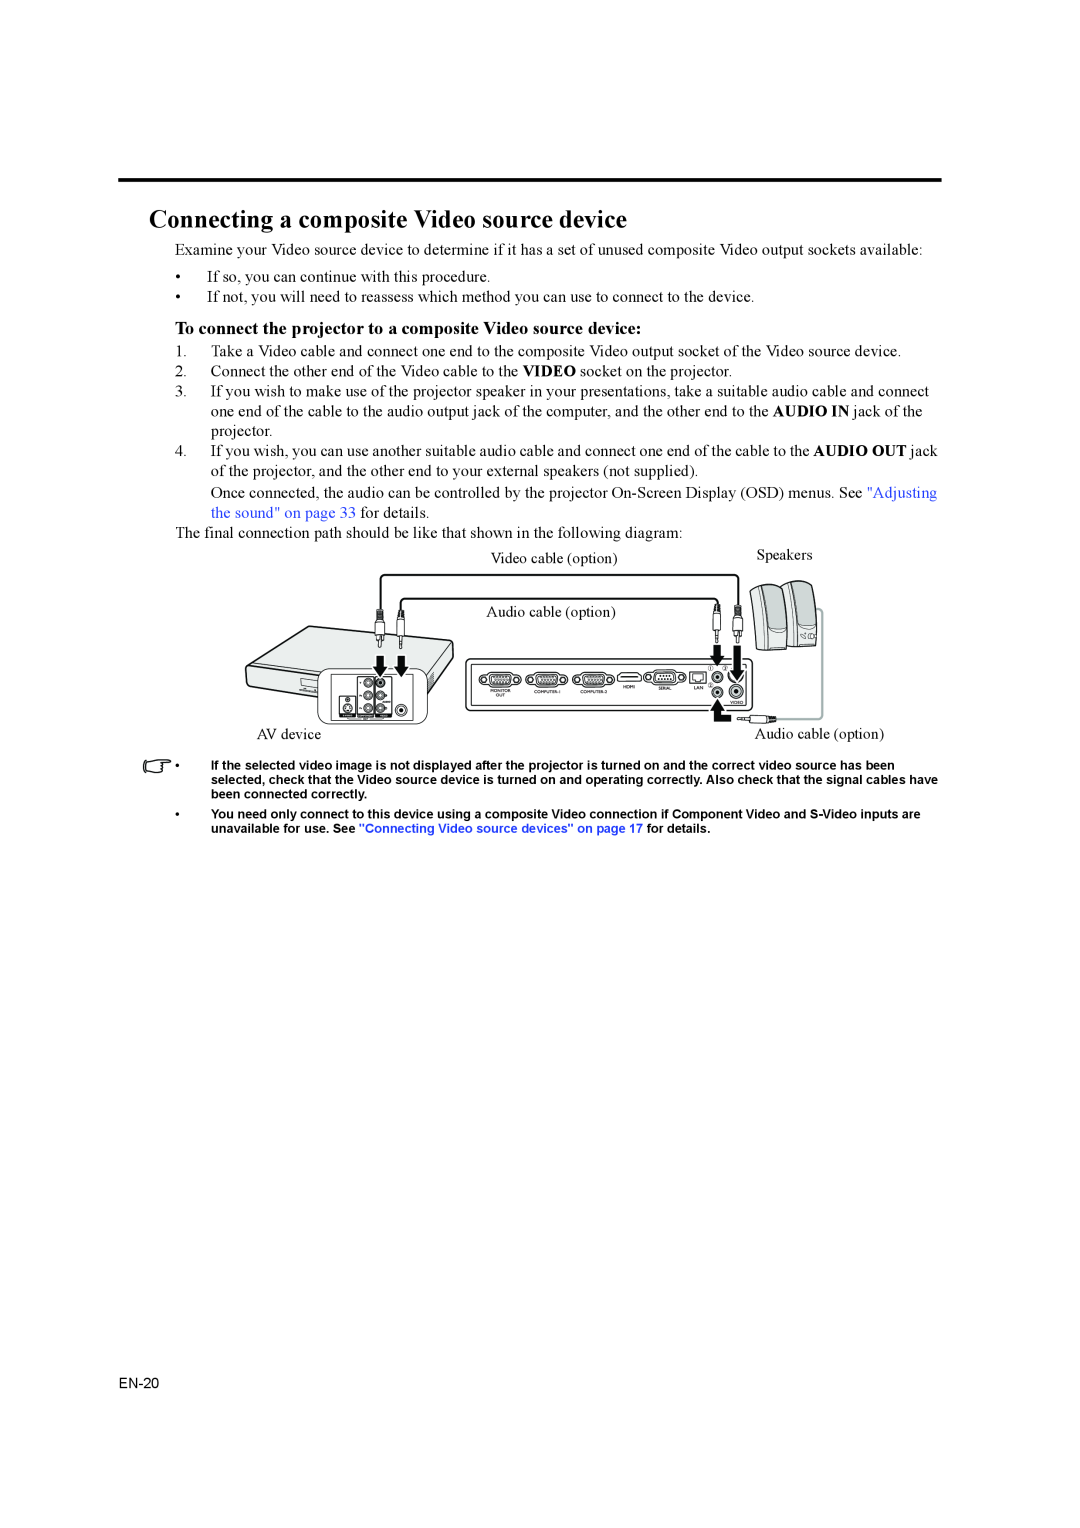 Mitsubishi Electronics EW270U user manual Connecting a composite Video source device, the sound on page 33 for details 